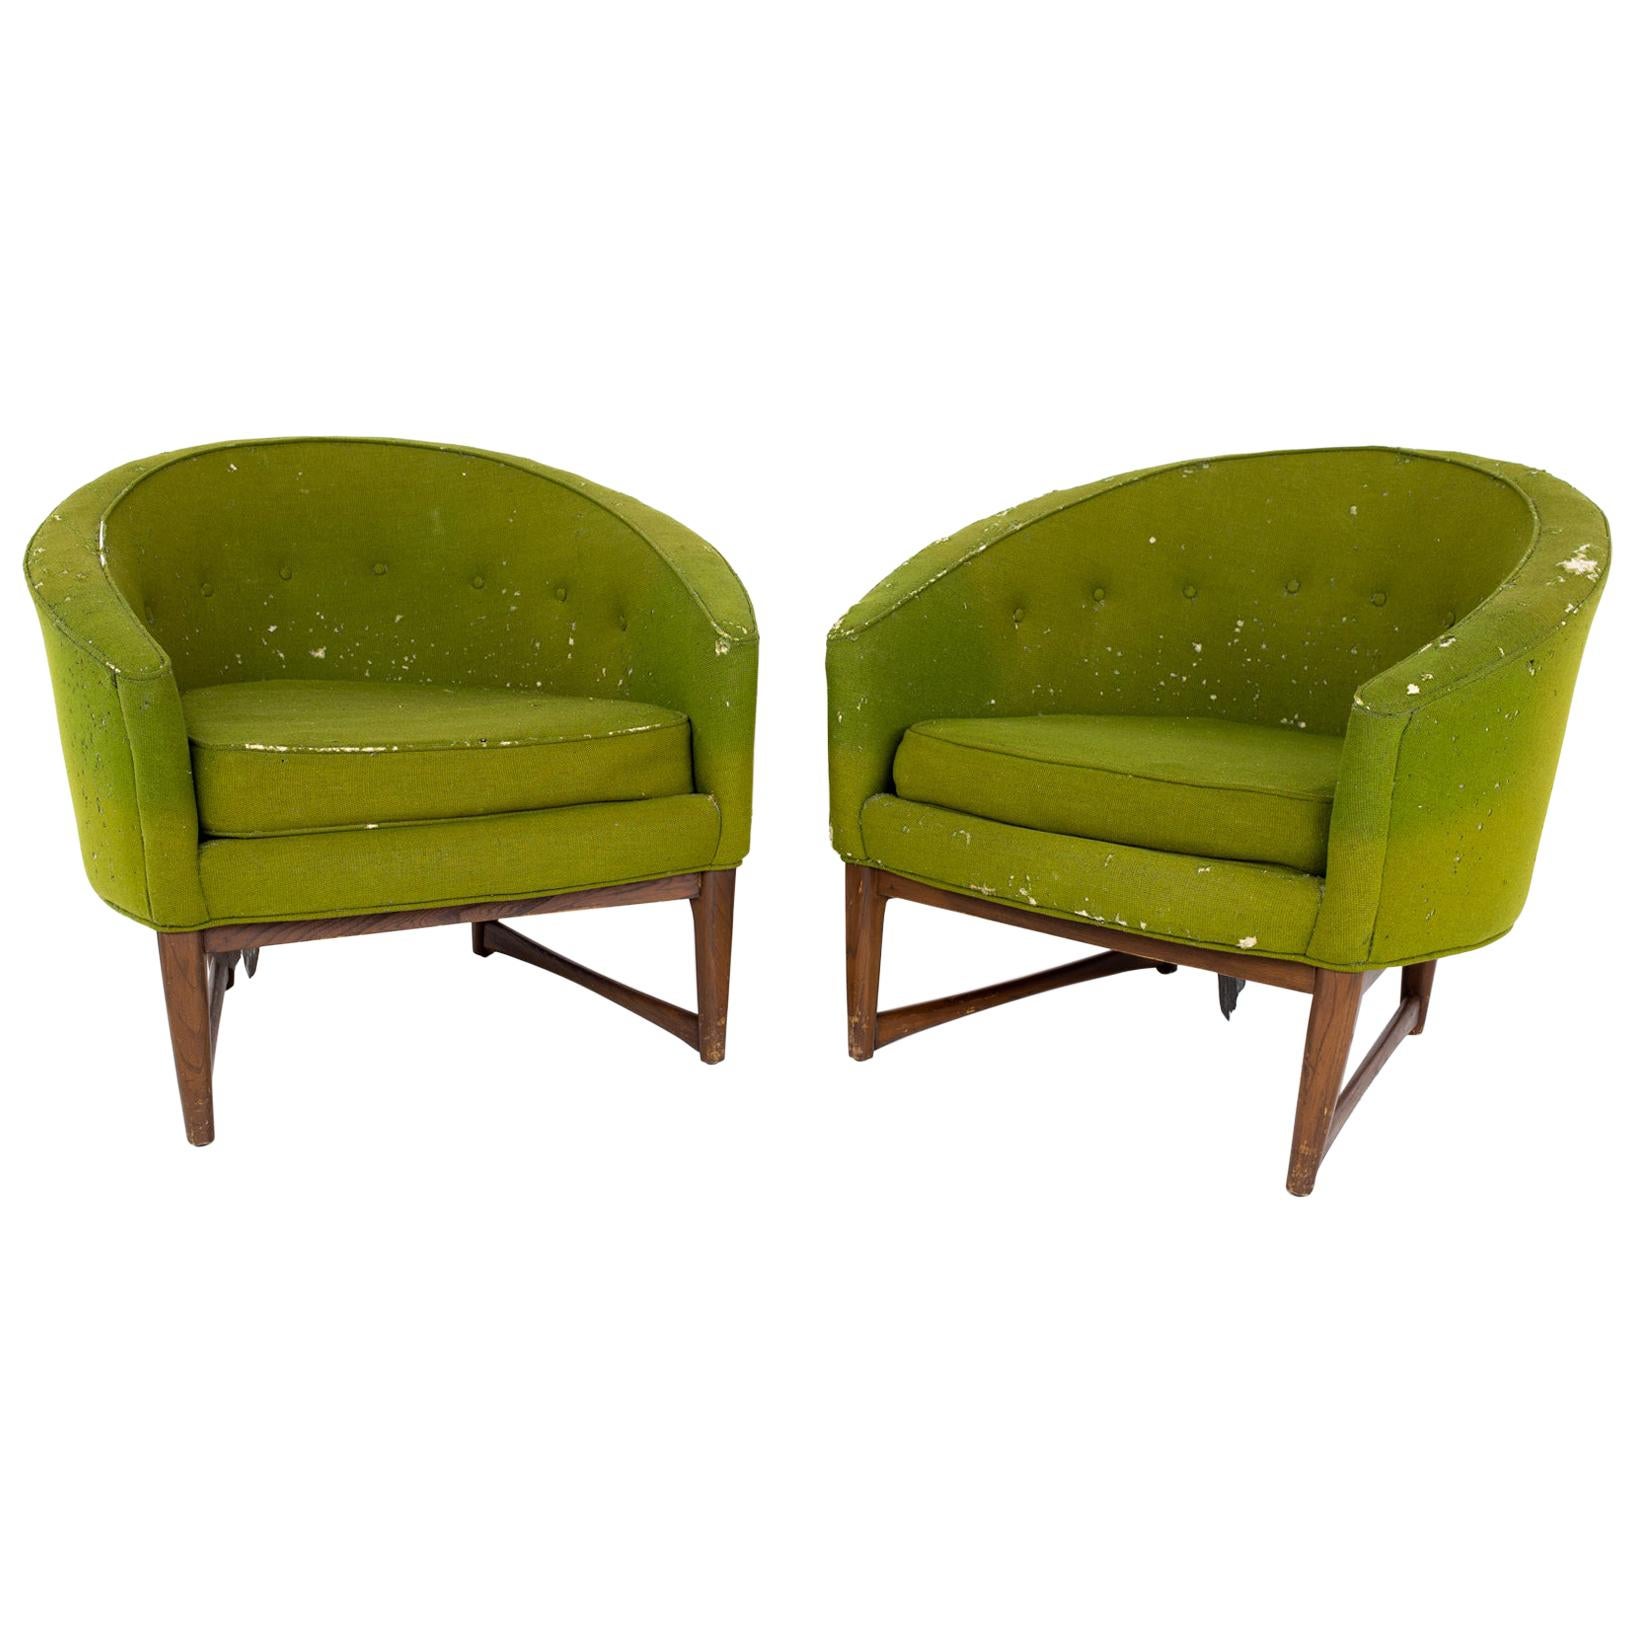 Lawrence Peabody for Richardson Nemschoff mid century lounge chairs - A pair
Each chair measures: 30 wide x 21 deep x 26 high, with a seat height of 15 inches and arm height of 19 inches
Ready for new upholstery

All pieces of furniture can be had